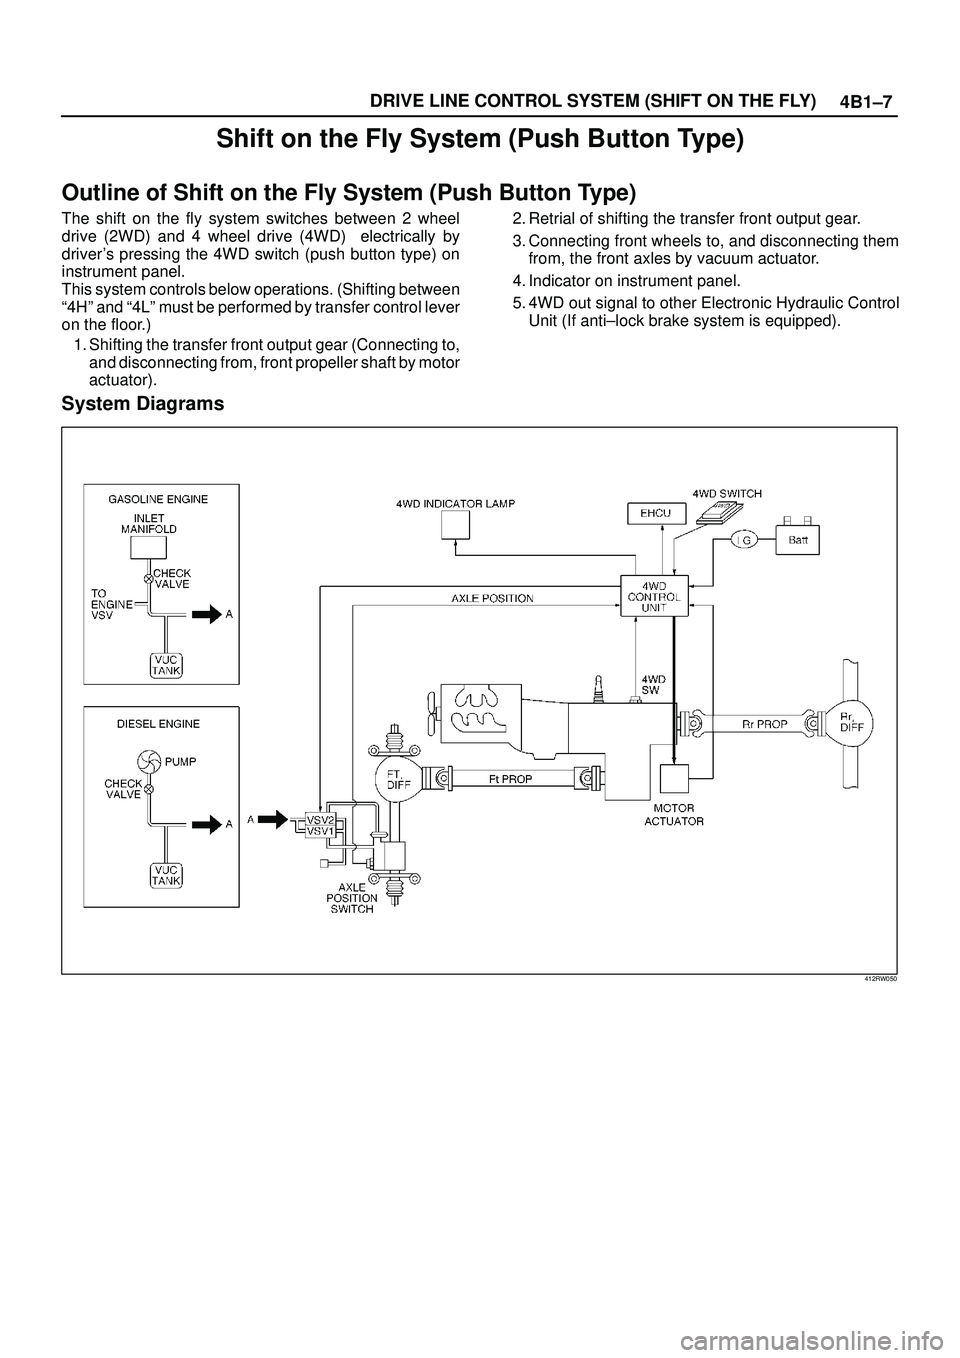 ISUZU TROOPER 1998  Service Repair Manual 4B1±7 DRIVE LINE CONTROL SYSTEM (SHIFT ON THE FLY)
Shift on the Fly System (Push Button Type)
Outline of Shift on the Fly System (Push Button Type)
The shift on the fly system switches between 2 whee